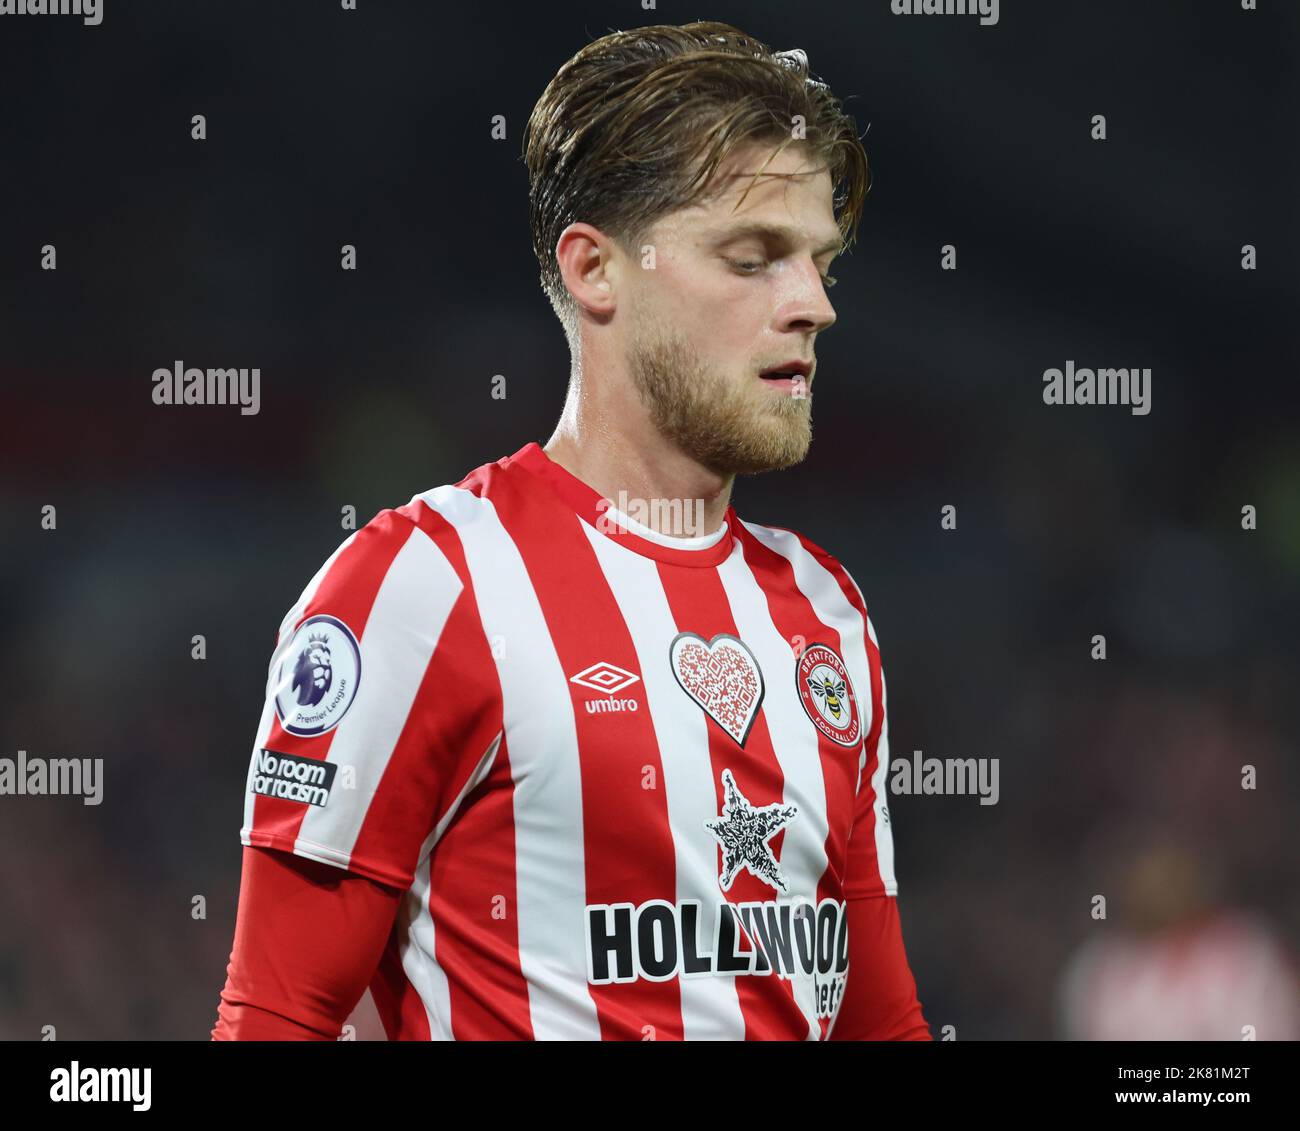 Brentford ENGLAND - October 19: Mathias Jensen of Brentford during English Premier League soccer match between Brentford against Chelsea at The Gtech Stock Photo